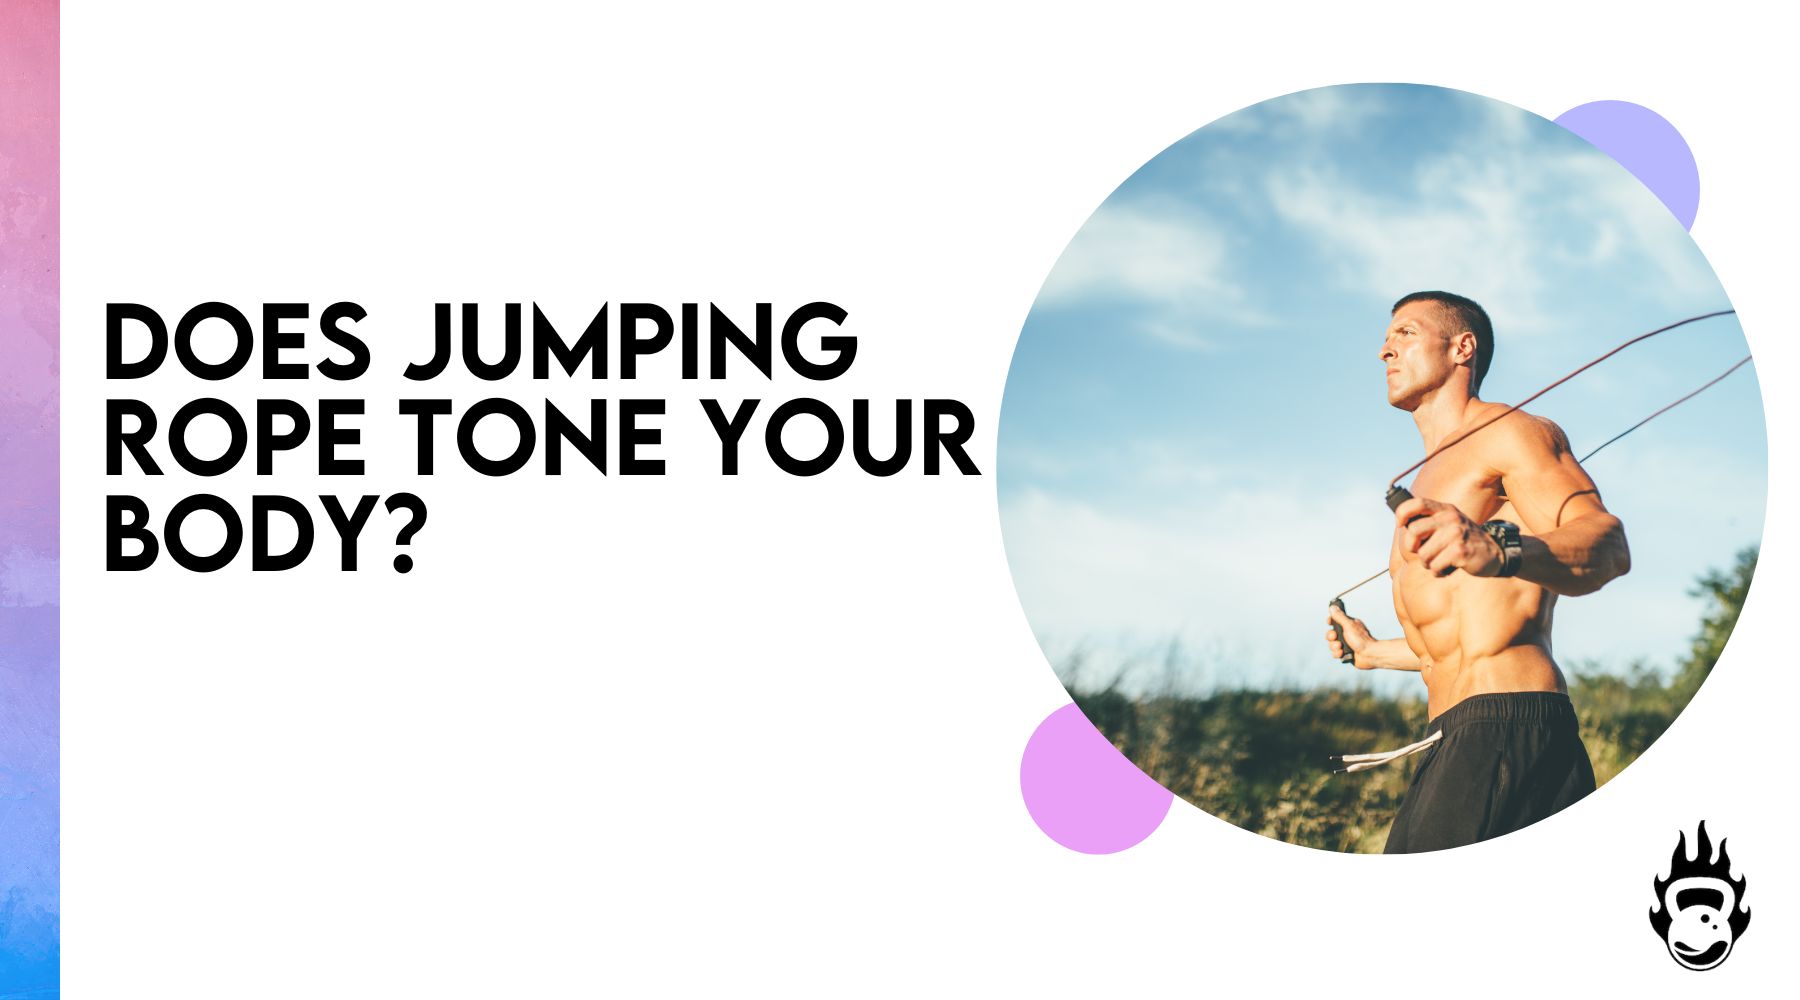 Does jumping rope tone your body?